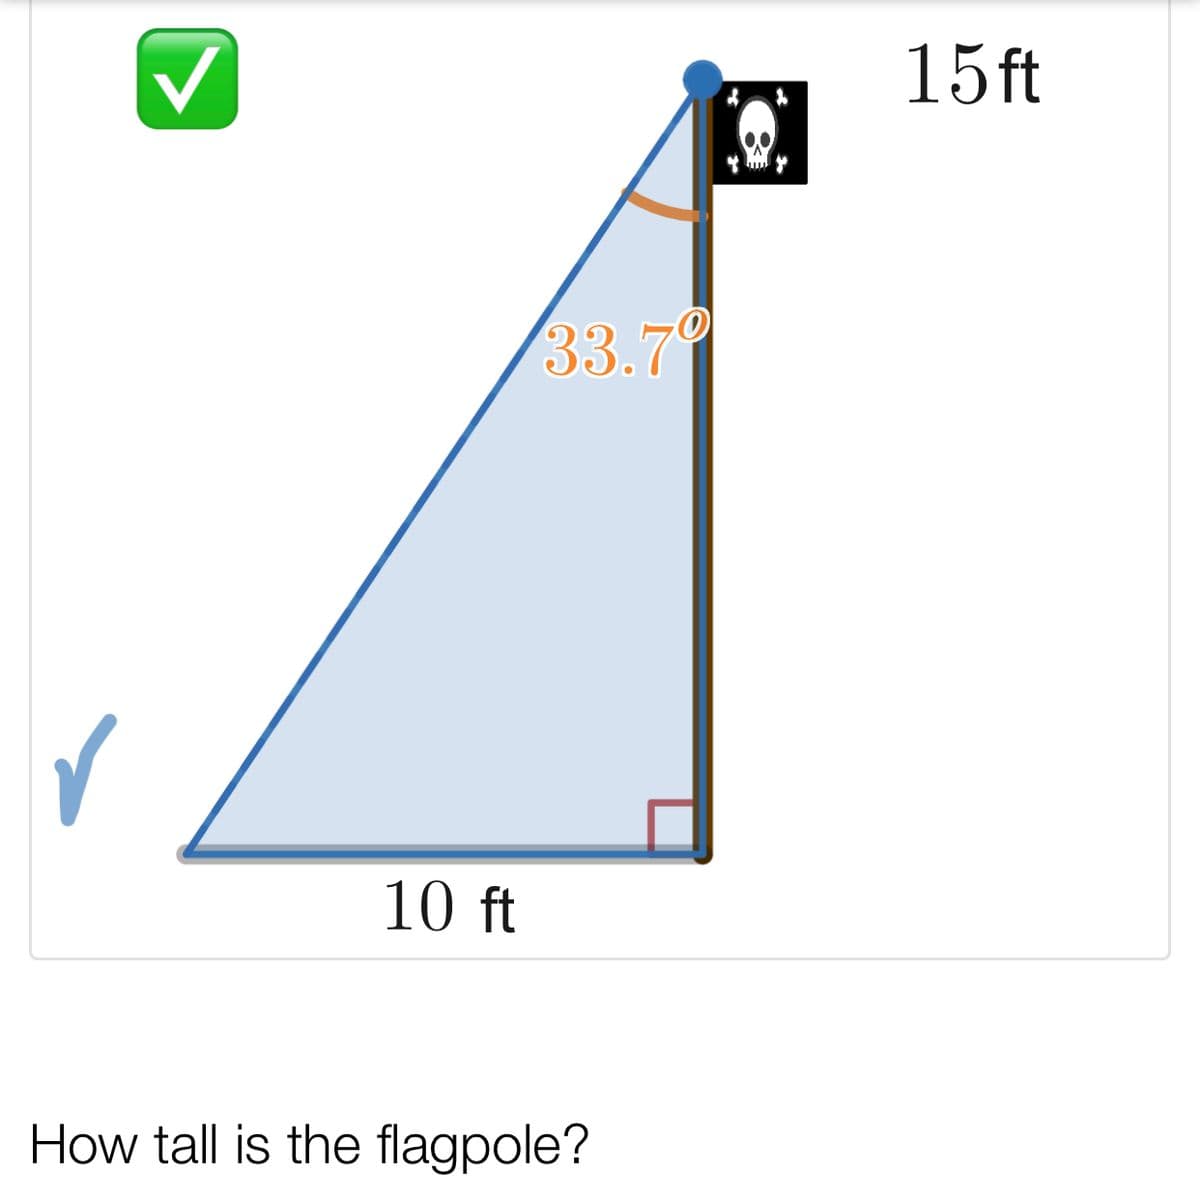 15ft
33.79
10 ft
How tall is the flagpole?
